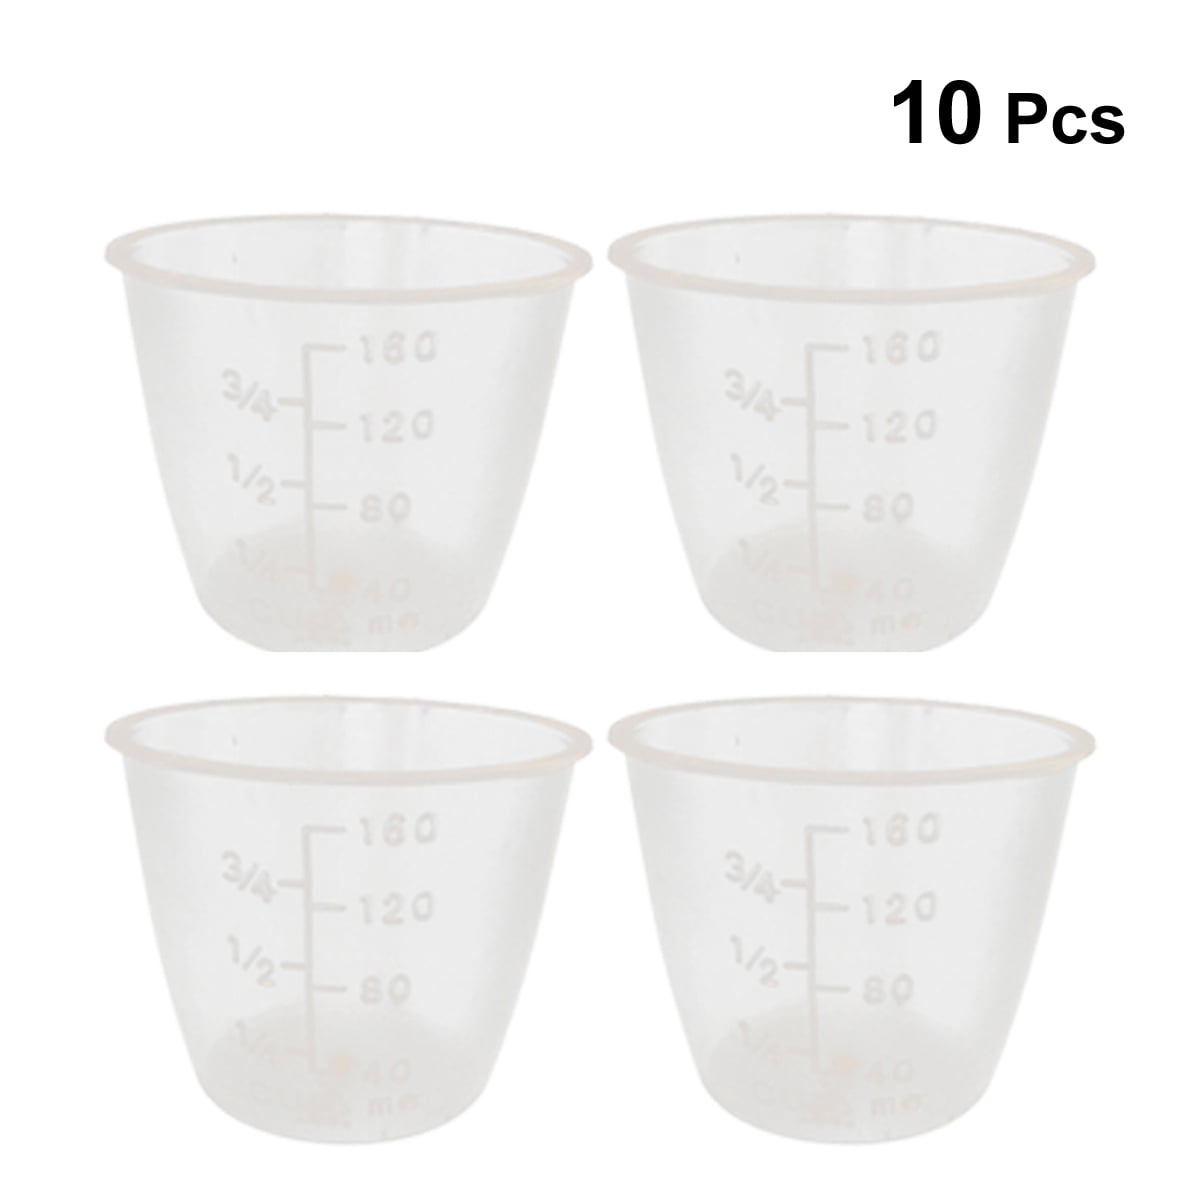 2Pcs/Lot Hot Sale Rice Cooker Measurement Tools Measuring Cup Food Grade  Plastic Rice for Dry and Liquid Ingredients (160ml)